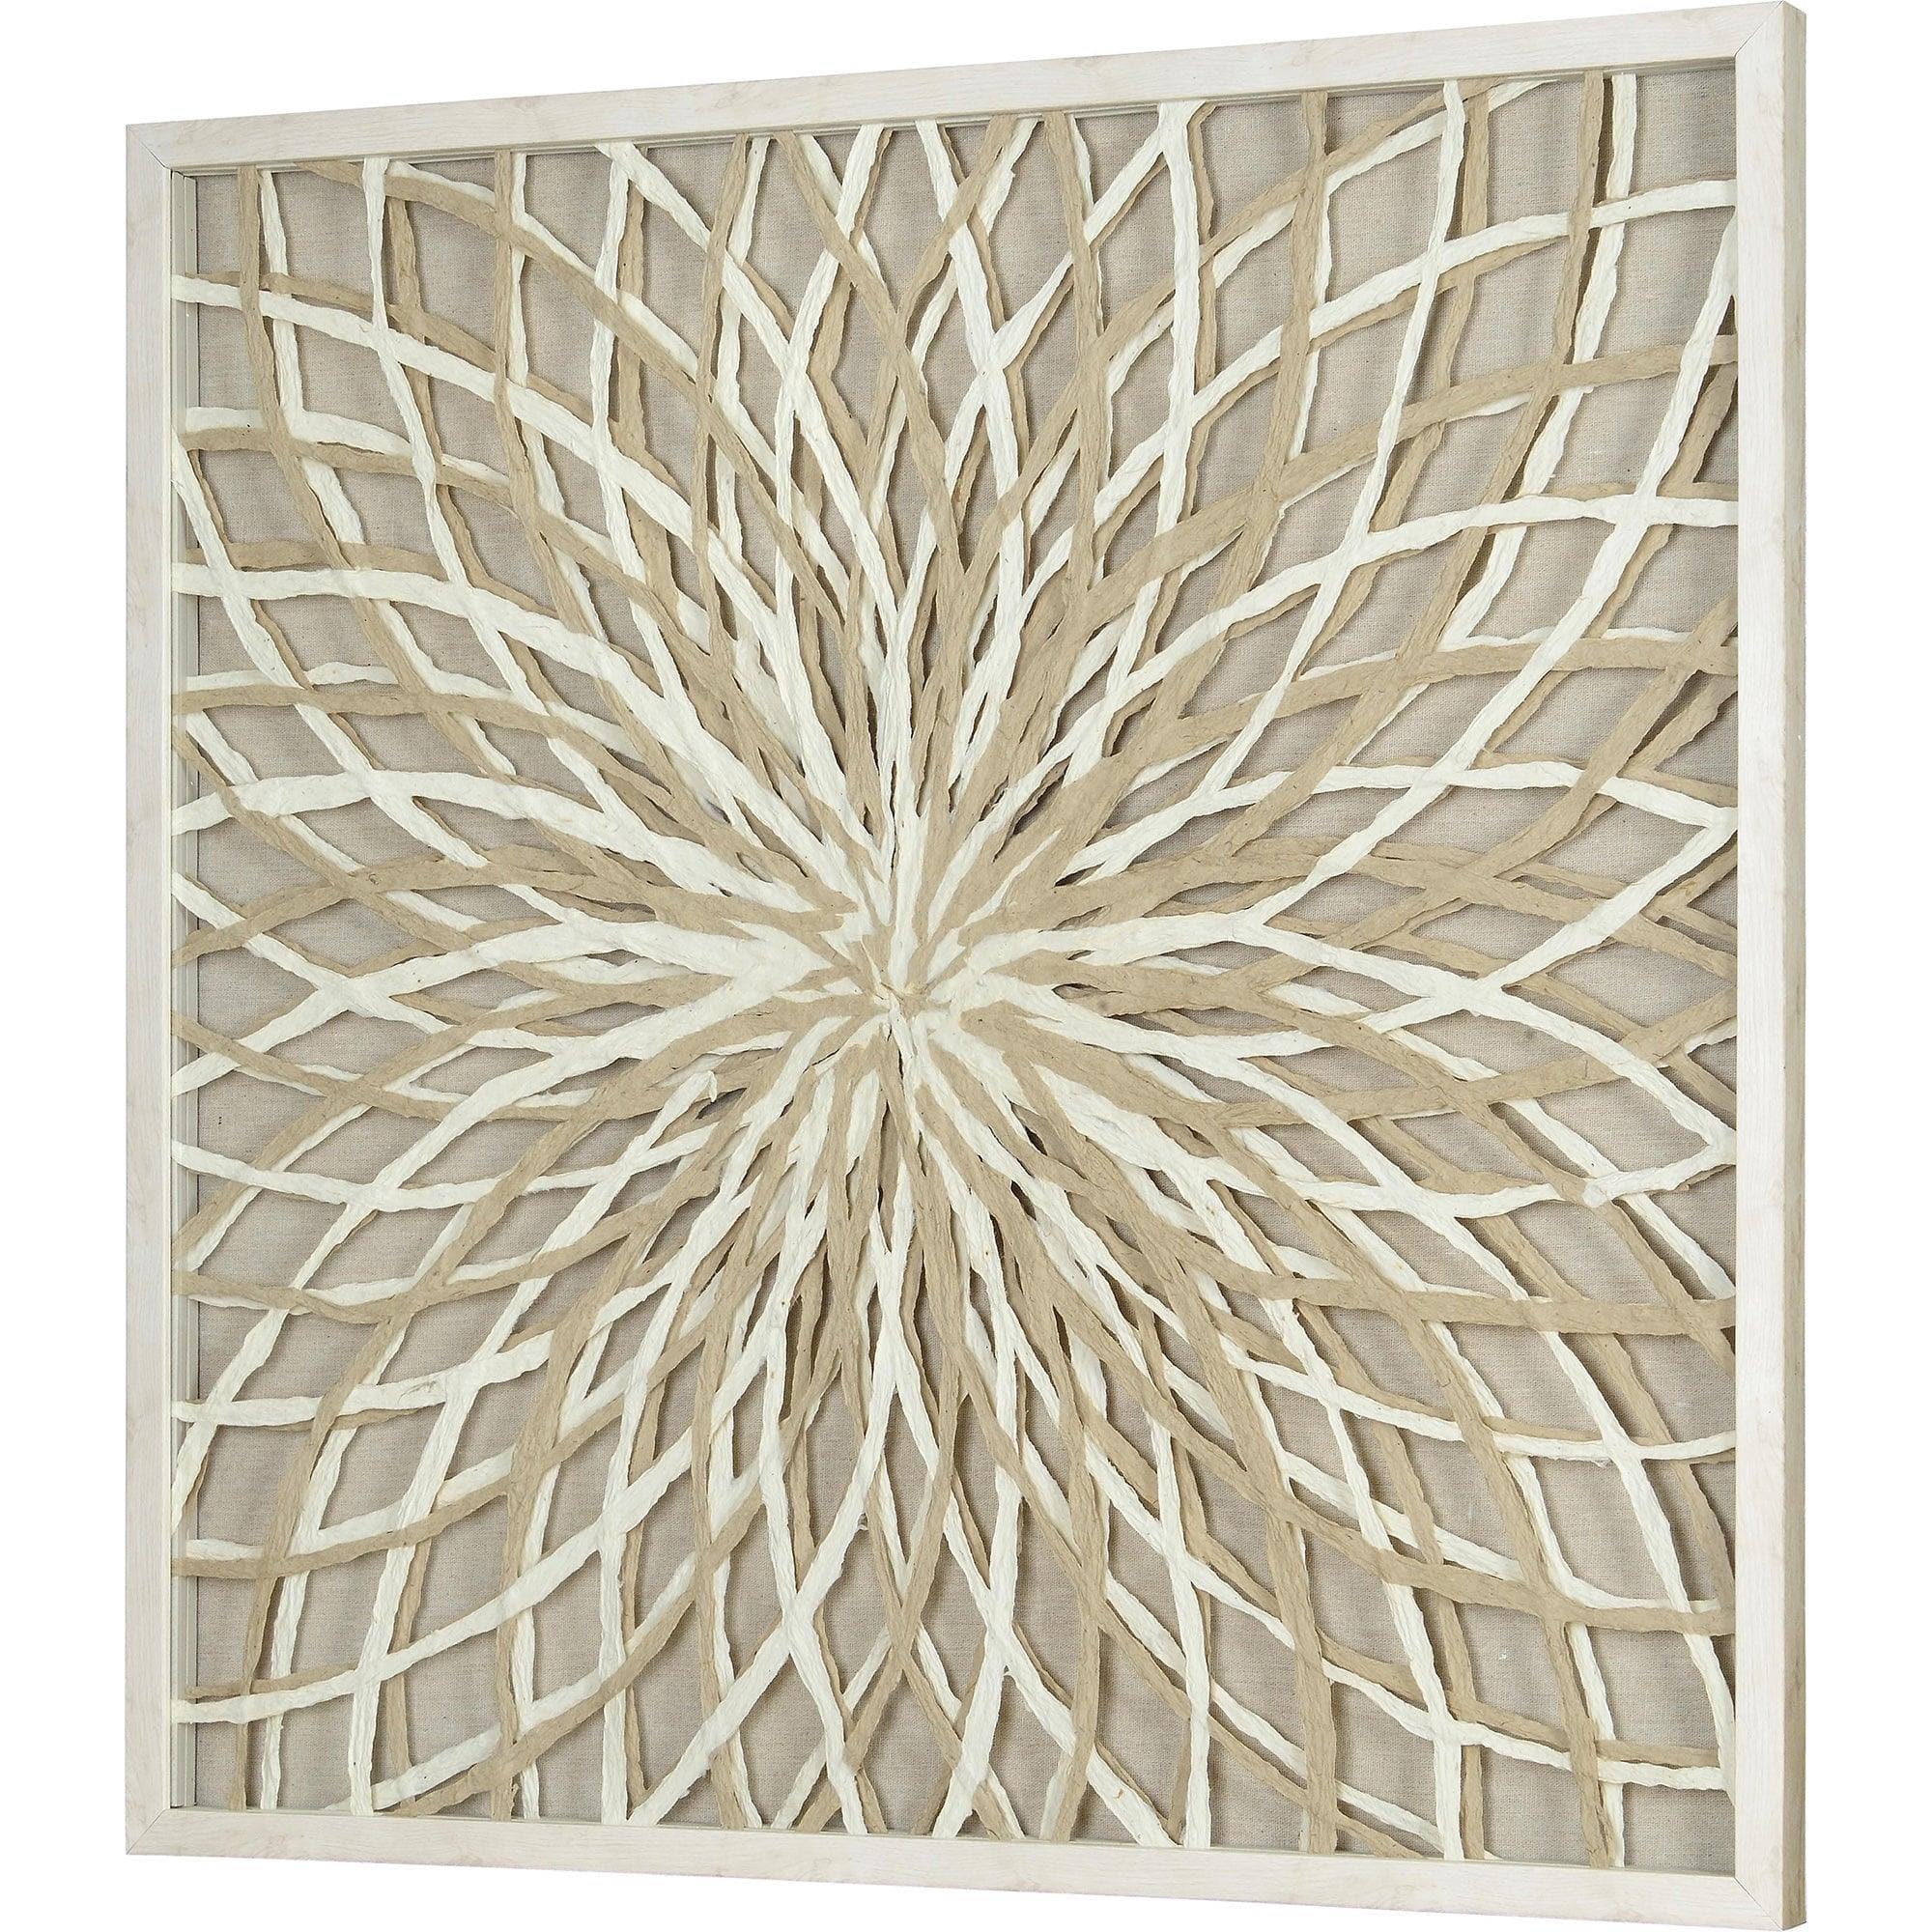 Renwil - Cocktail Wall Art - W6543 | Montreal Lighting & Hardware